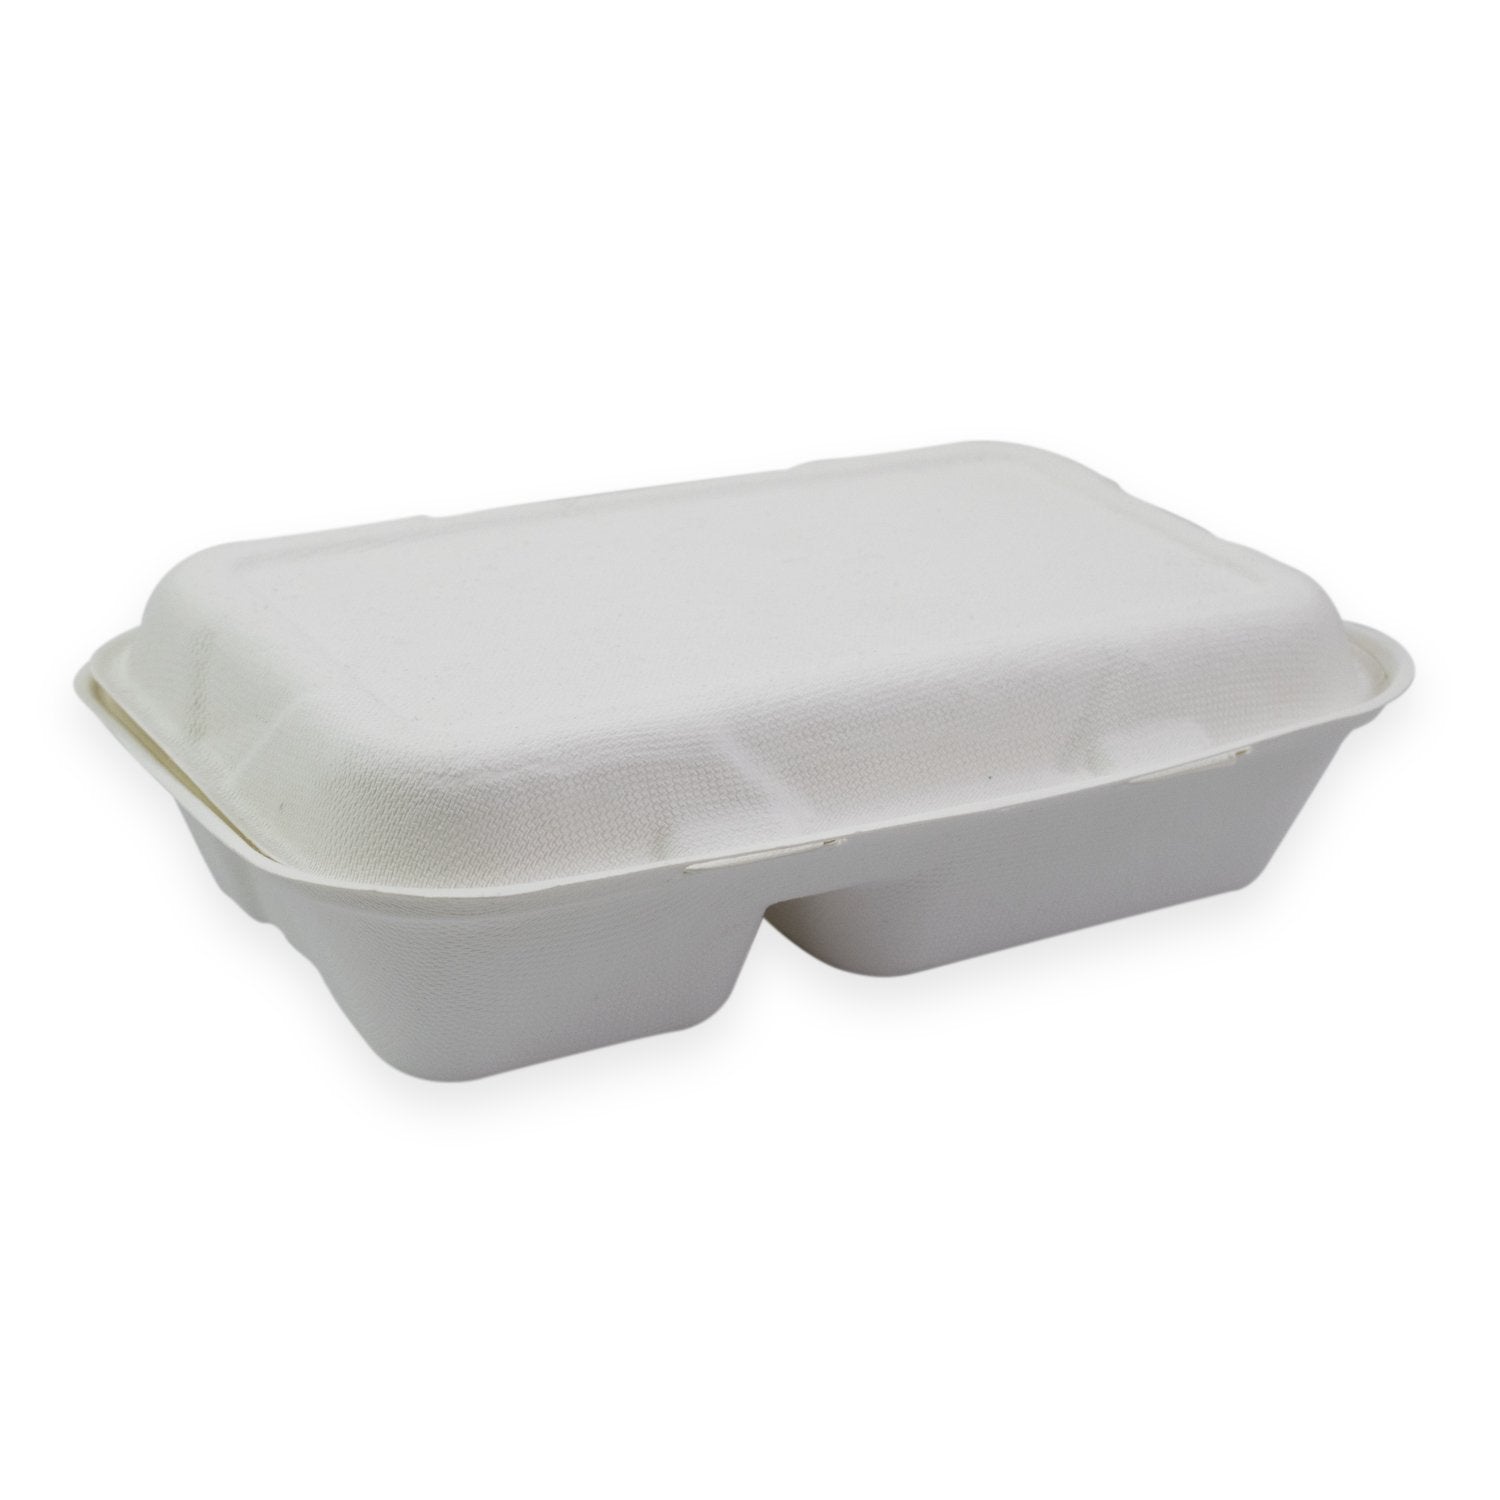 Sustain Sustain Clamshell Sugarcane White 9x6inch - CT/250 Bags & Takeaway  